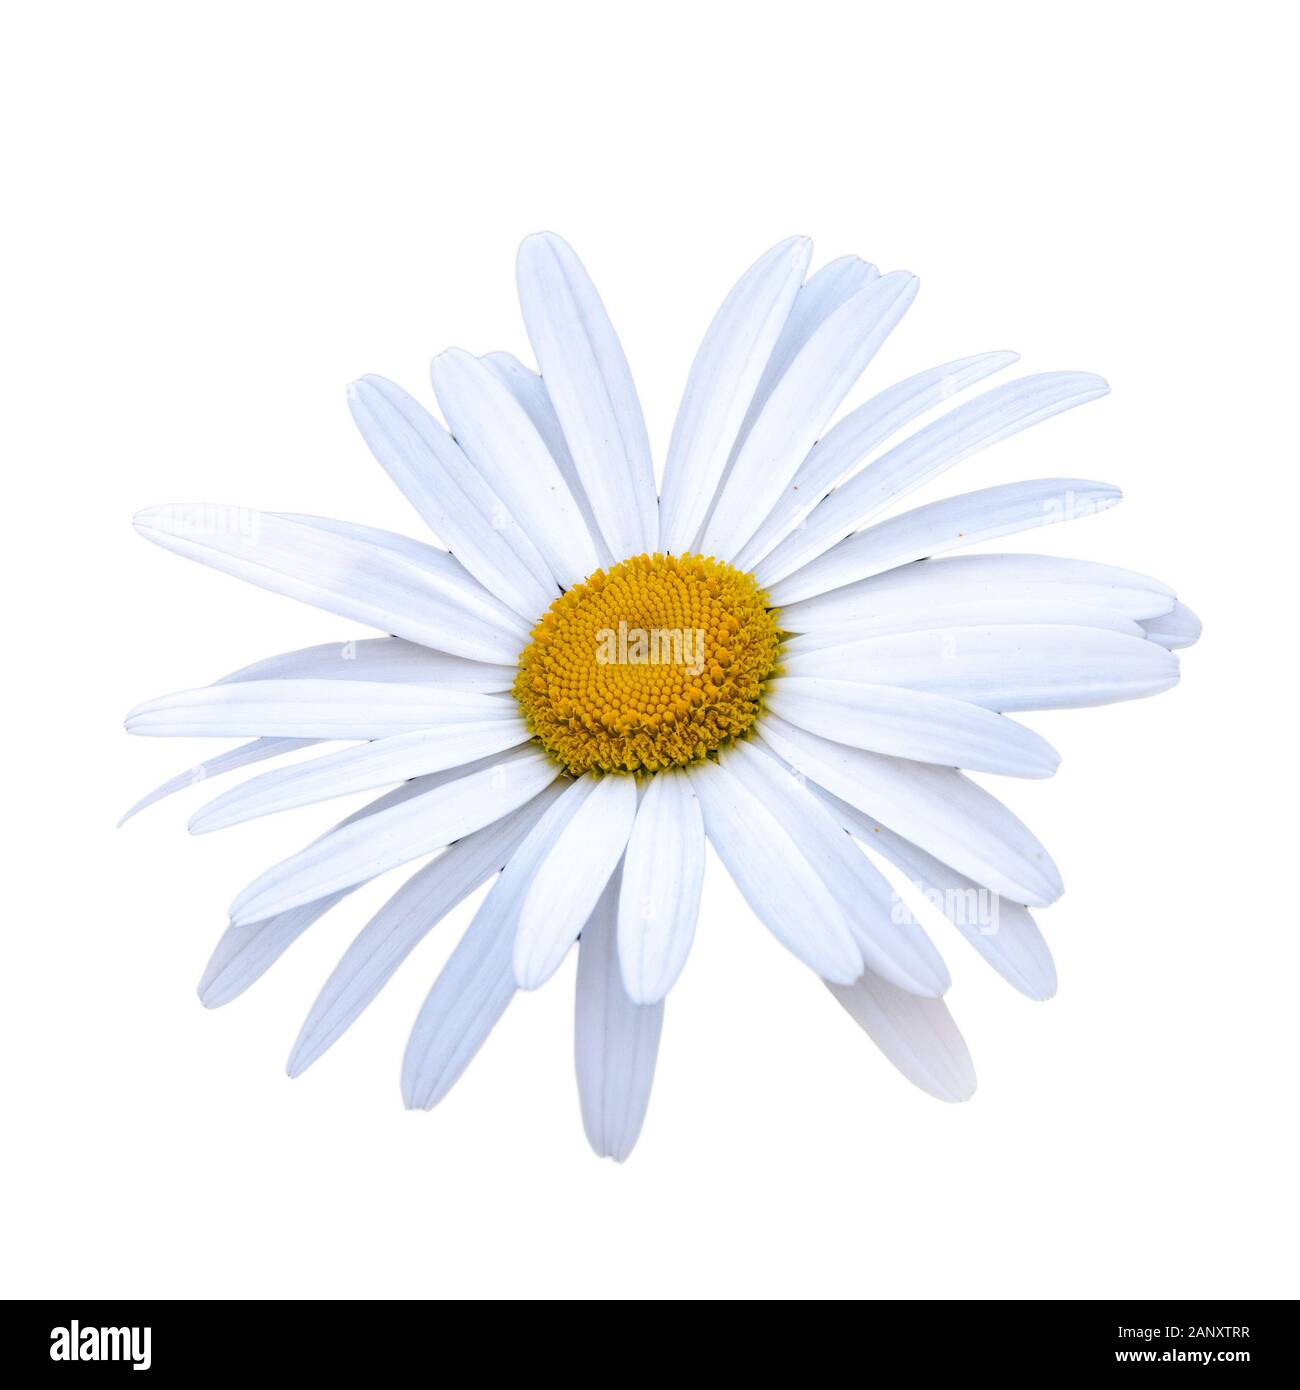 White and yellow daisy flower close-up isolated on a white background with copy space. Matricaria chamomilla, syn. Matricaria recutita Stock Photo